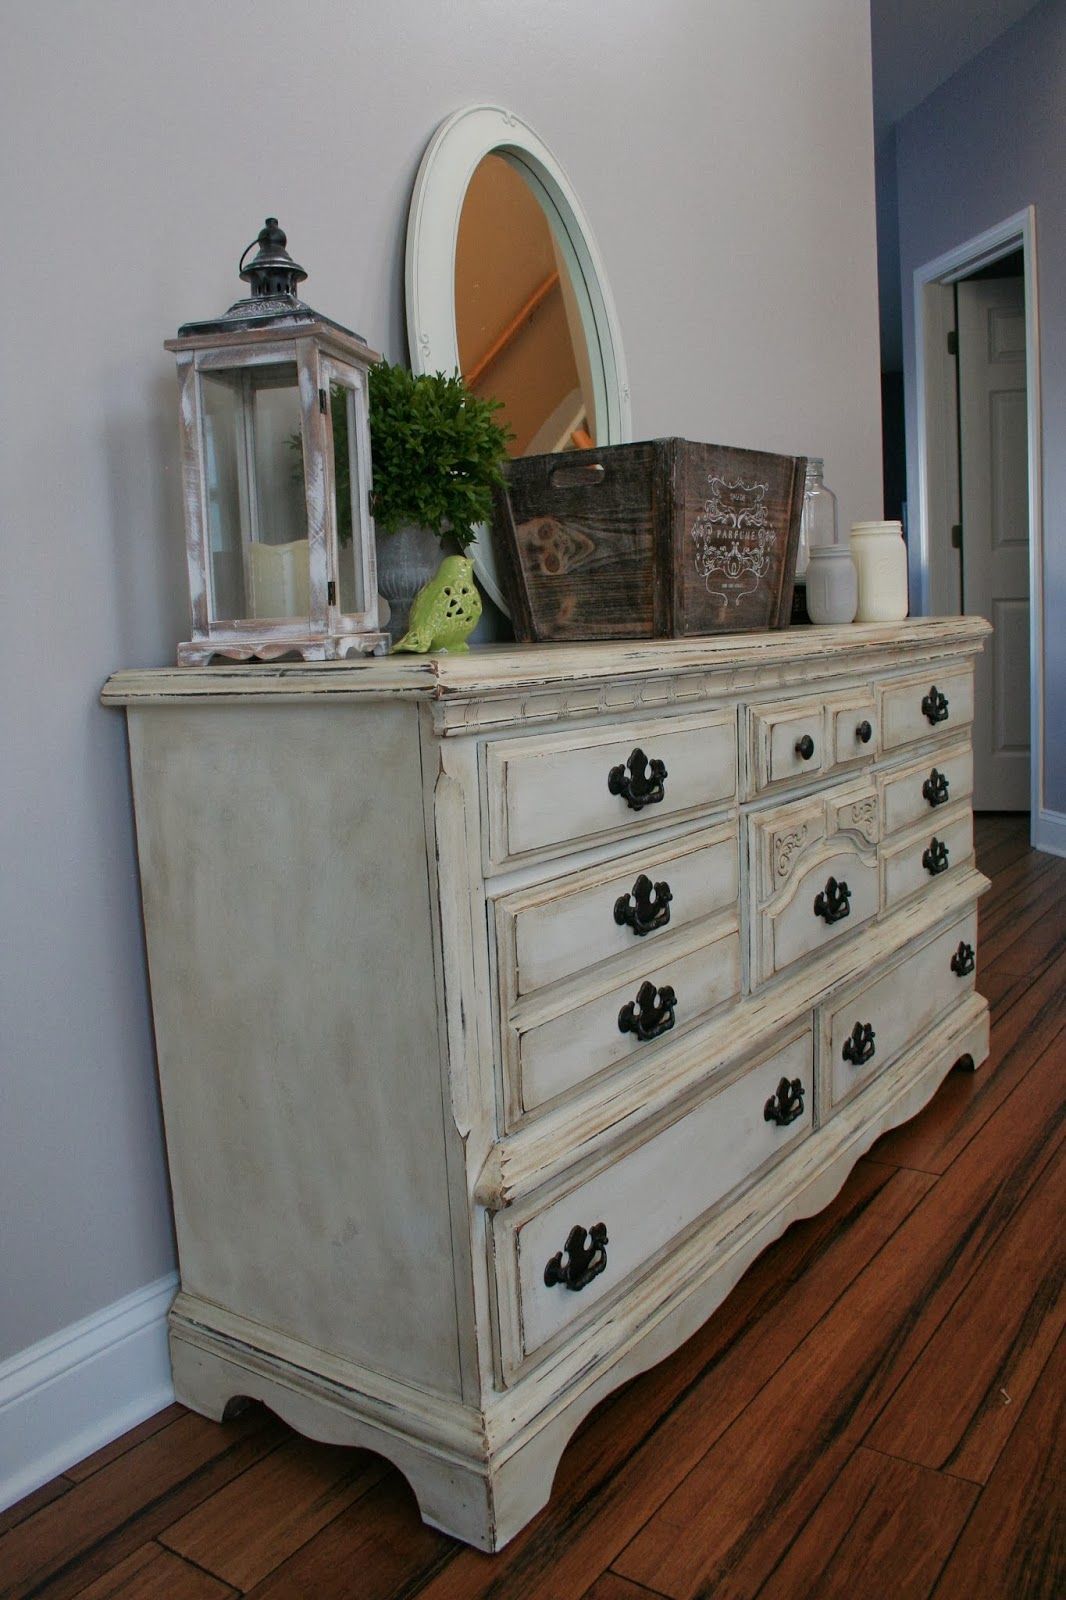 Annie Sloan Chalk Paint in Old White with heavy application of Annie Sloan Dark Wax